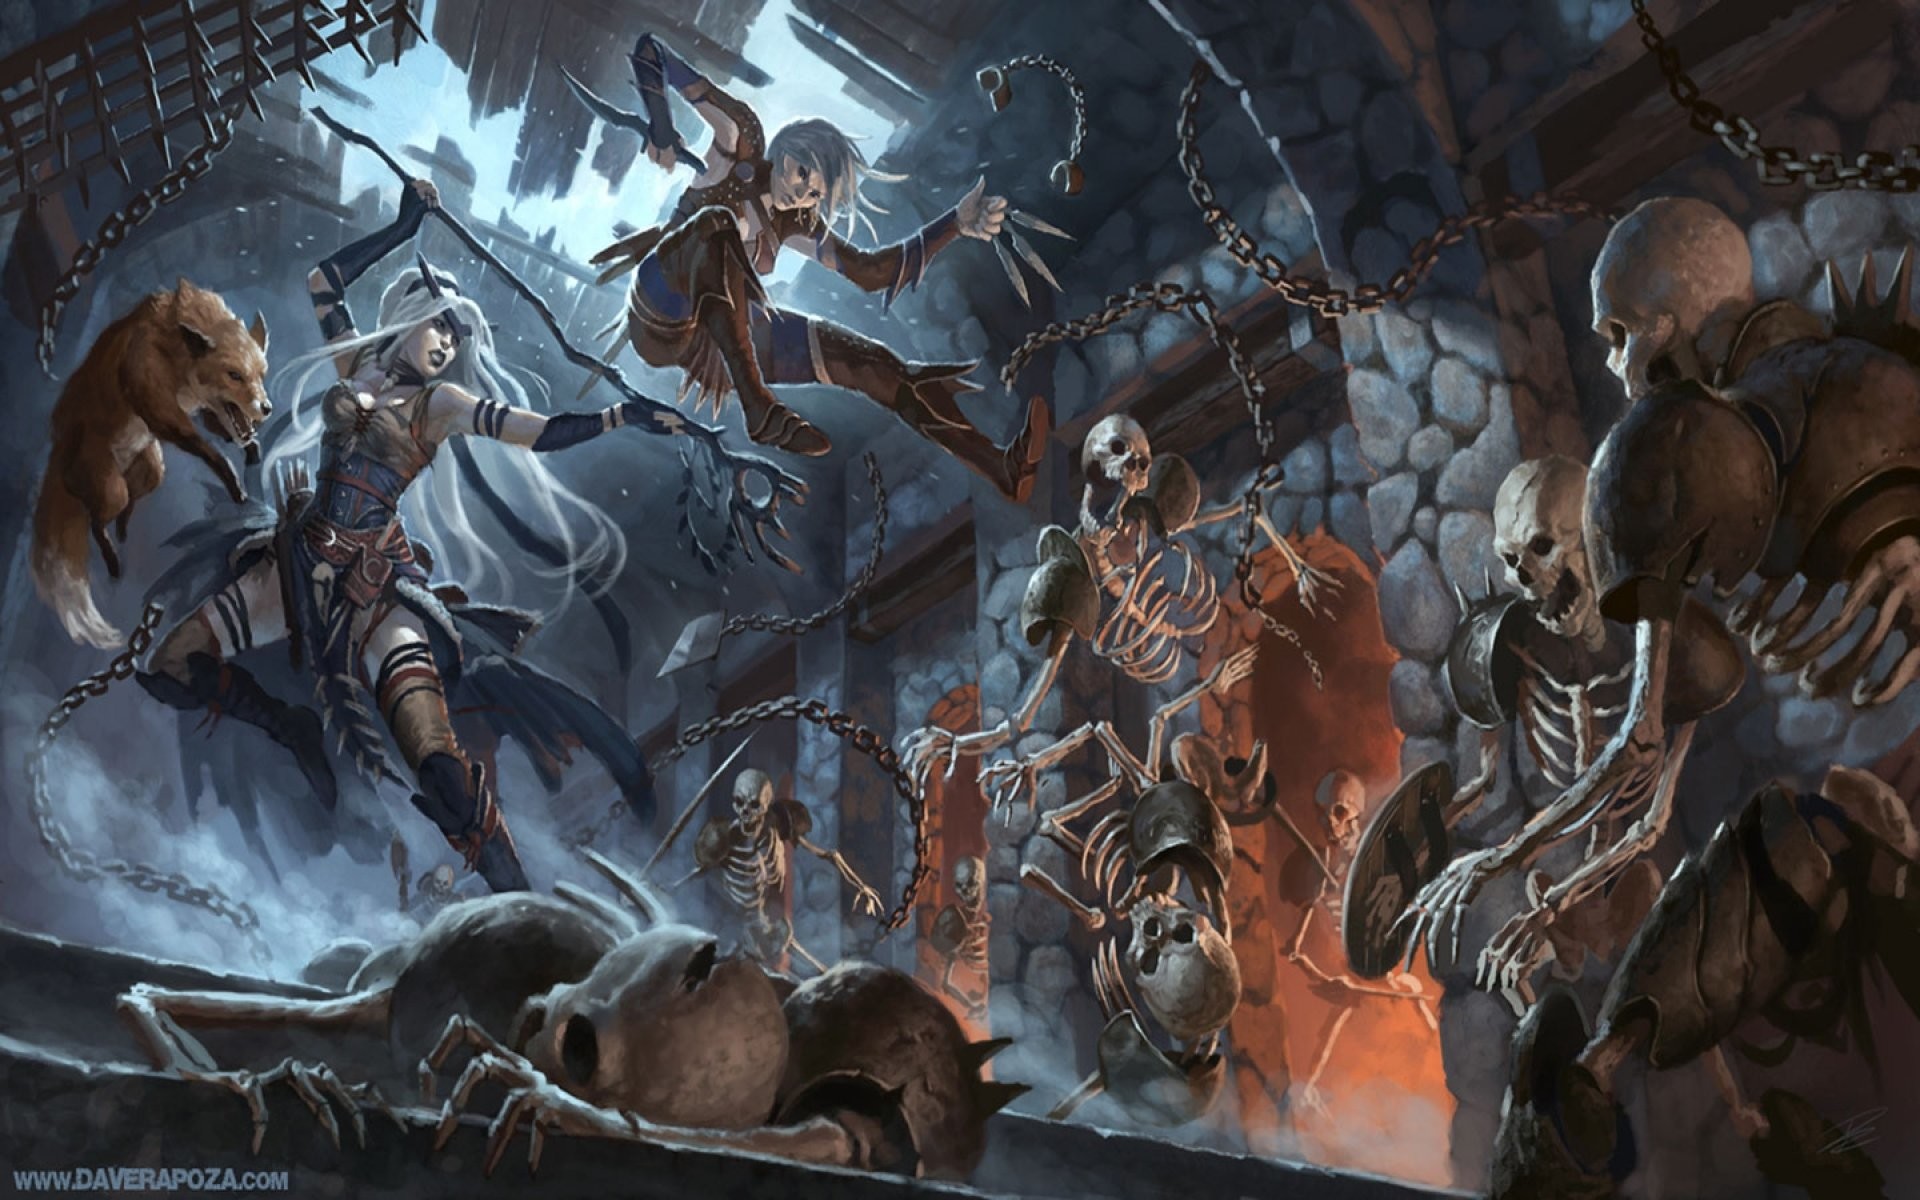 1920x1200 Dungeons-and-dragons Fantasy Adventure Board Rpg Dungeons Dragons (55)  Wallpaper At Fantasy Wallpapers